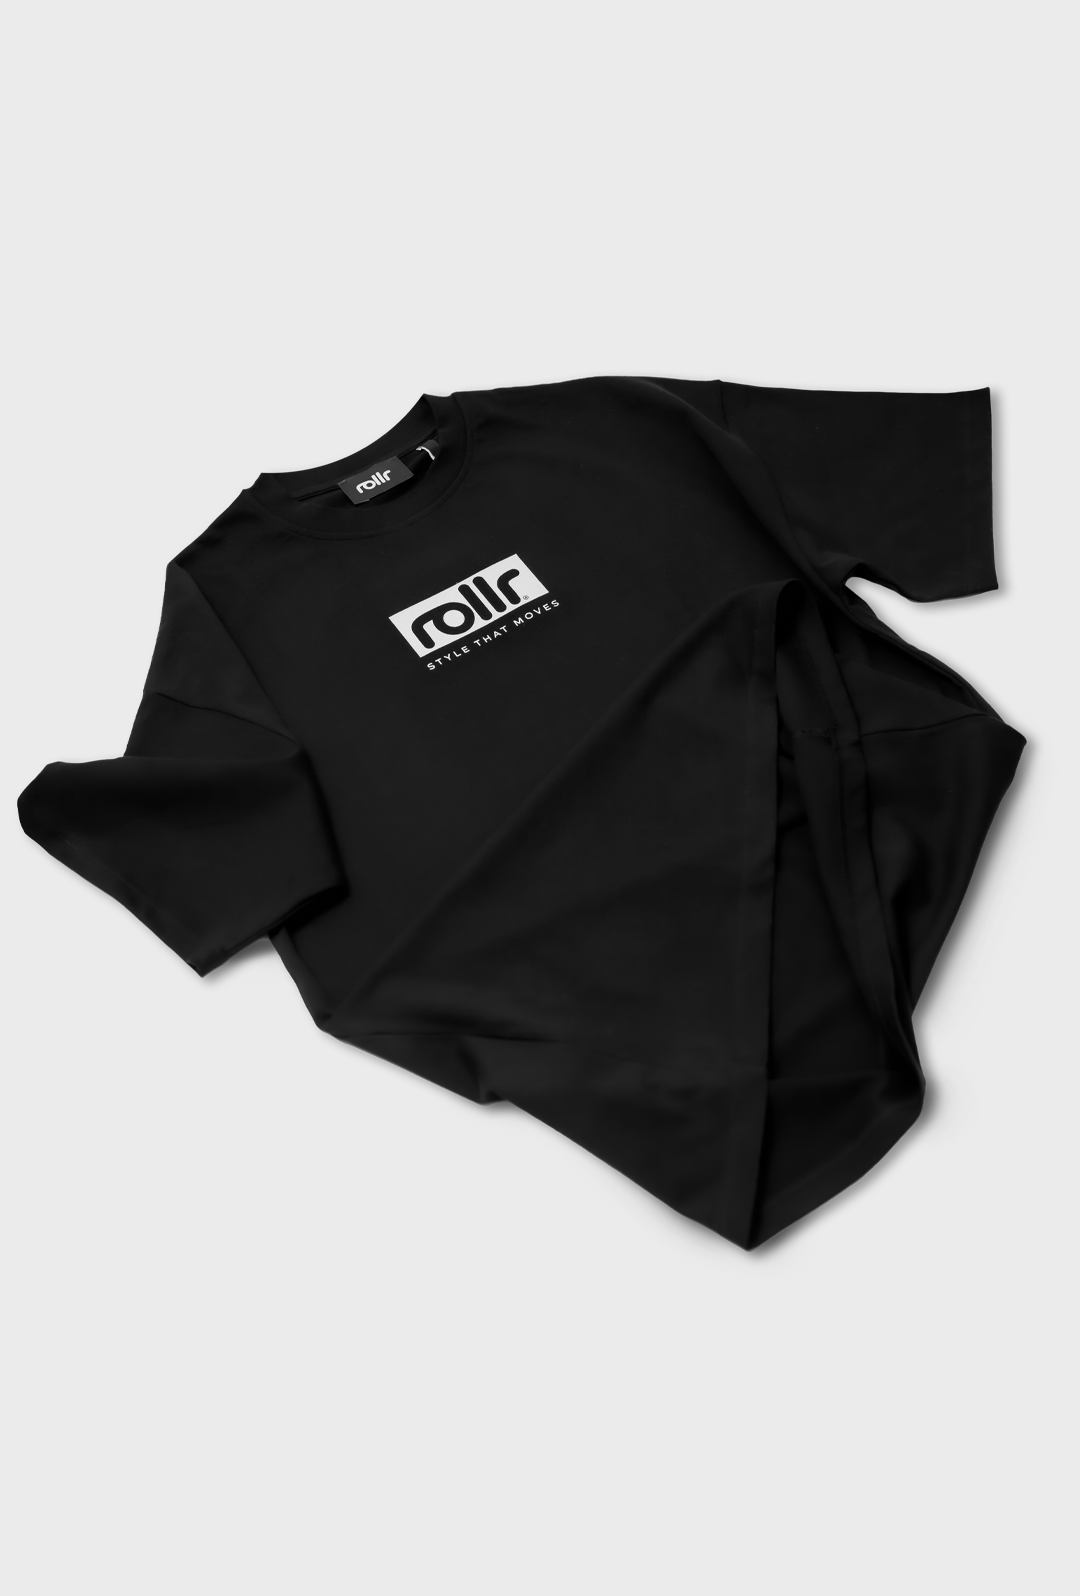 Oversized midnight black heavyweight tshirt in french terry organic cotton with rollr logo and style that moves tagline print